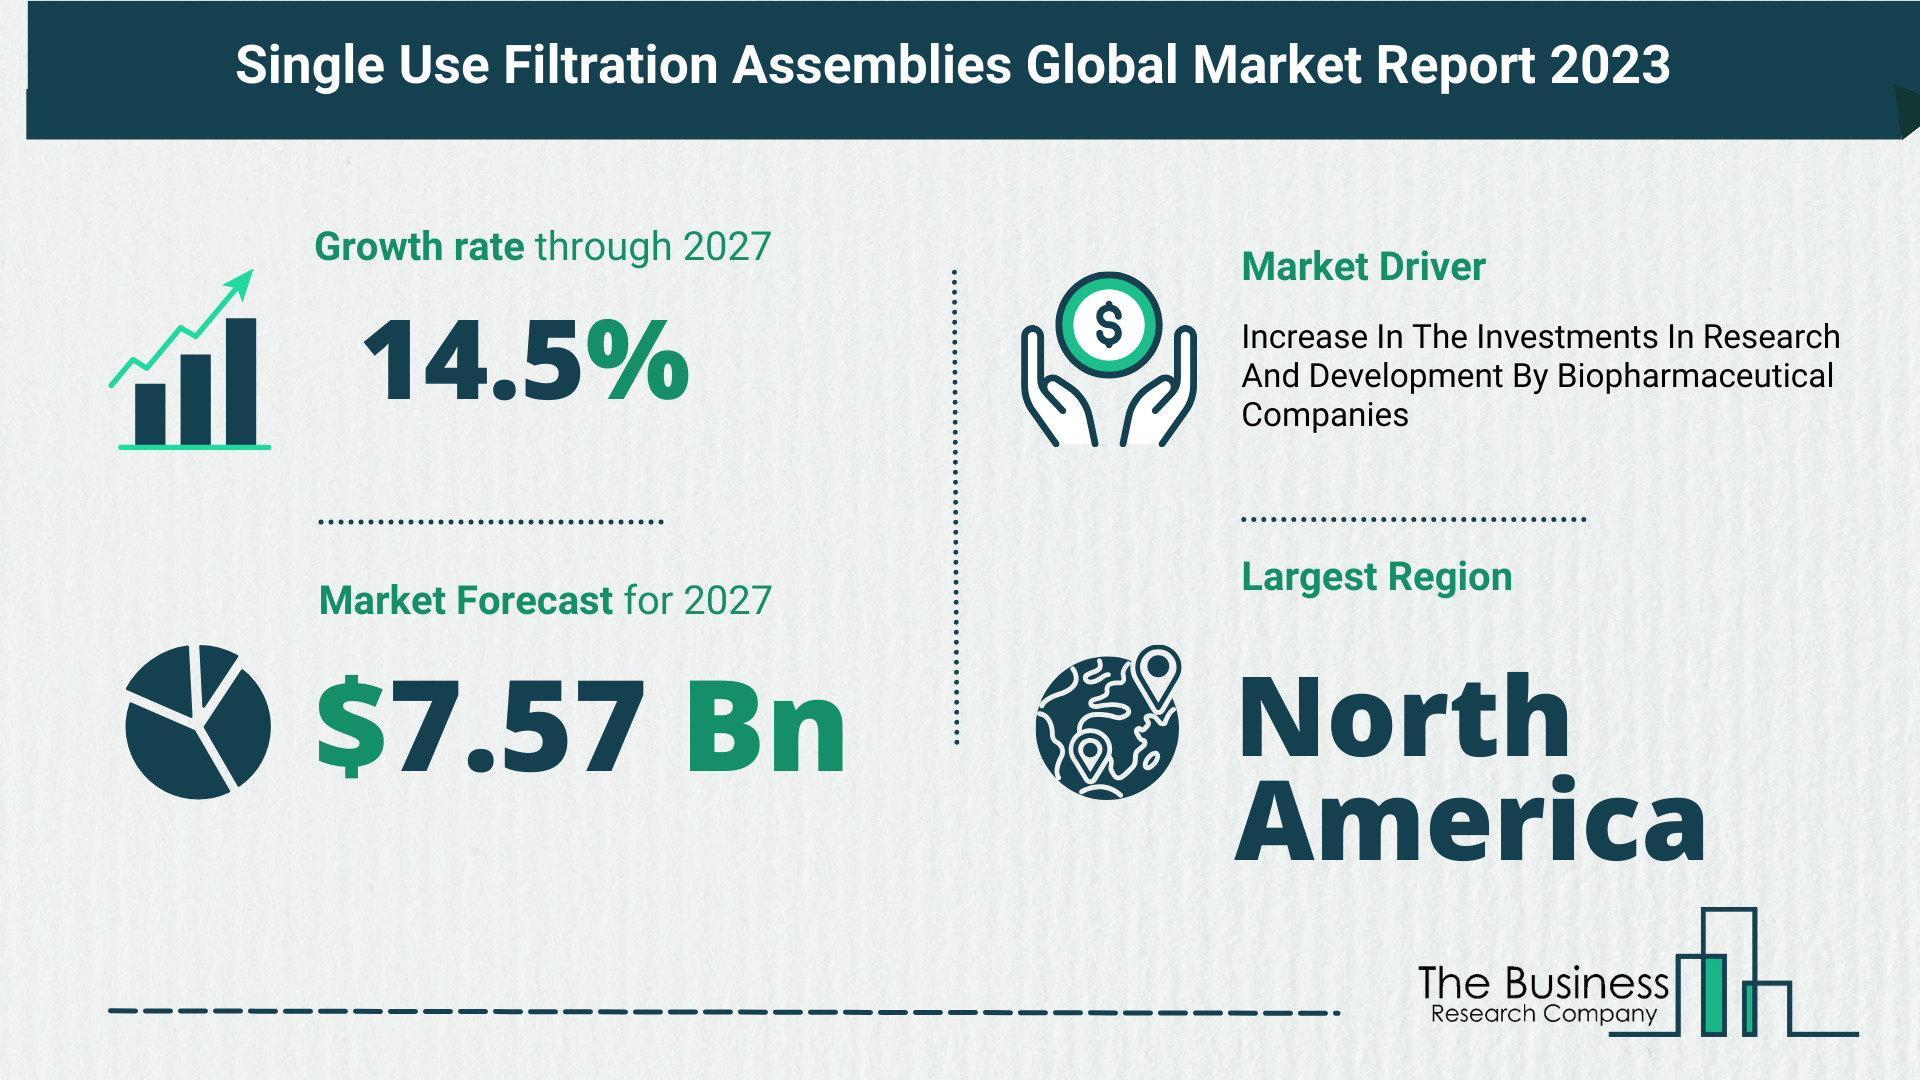 Global Single Use Filtration Assemblies Market Analysis 2023: Size, Share, And Key Trends